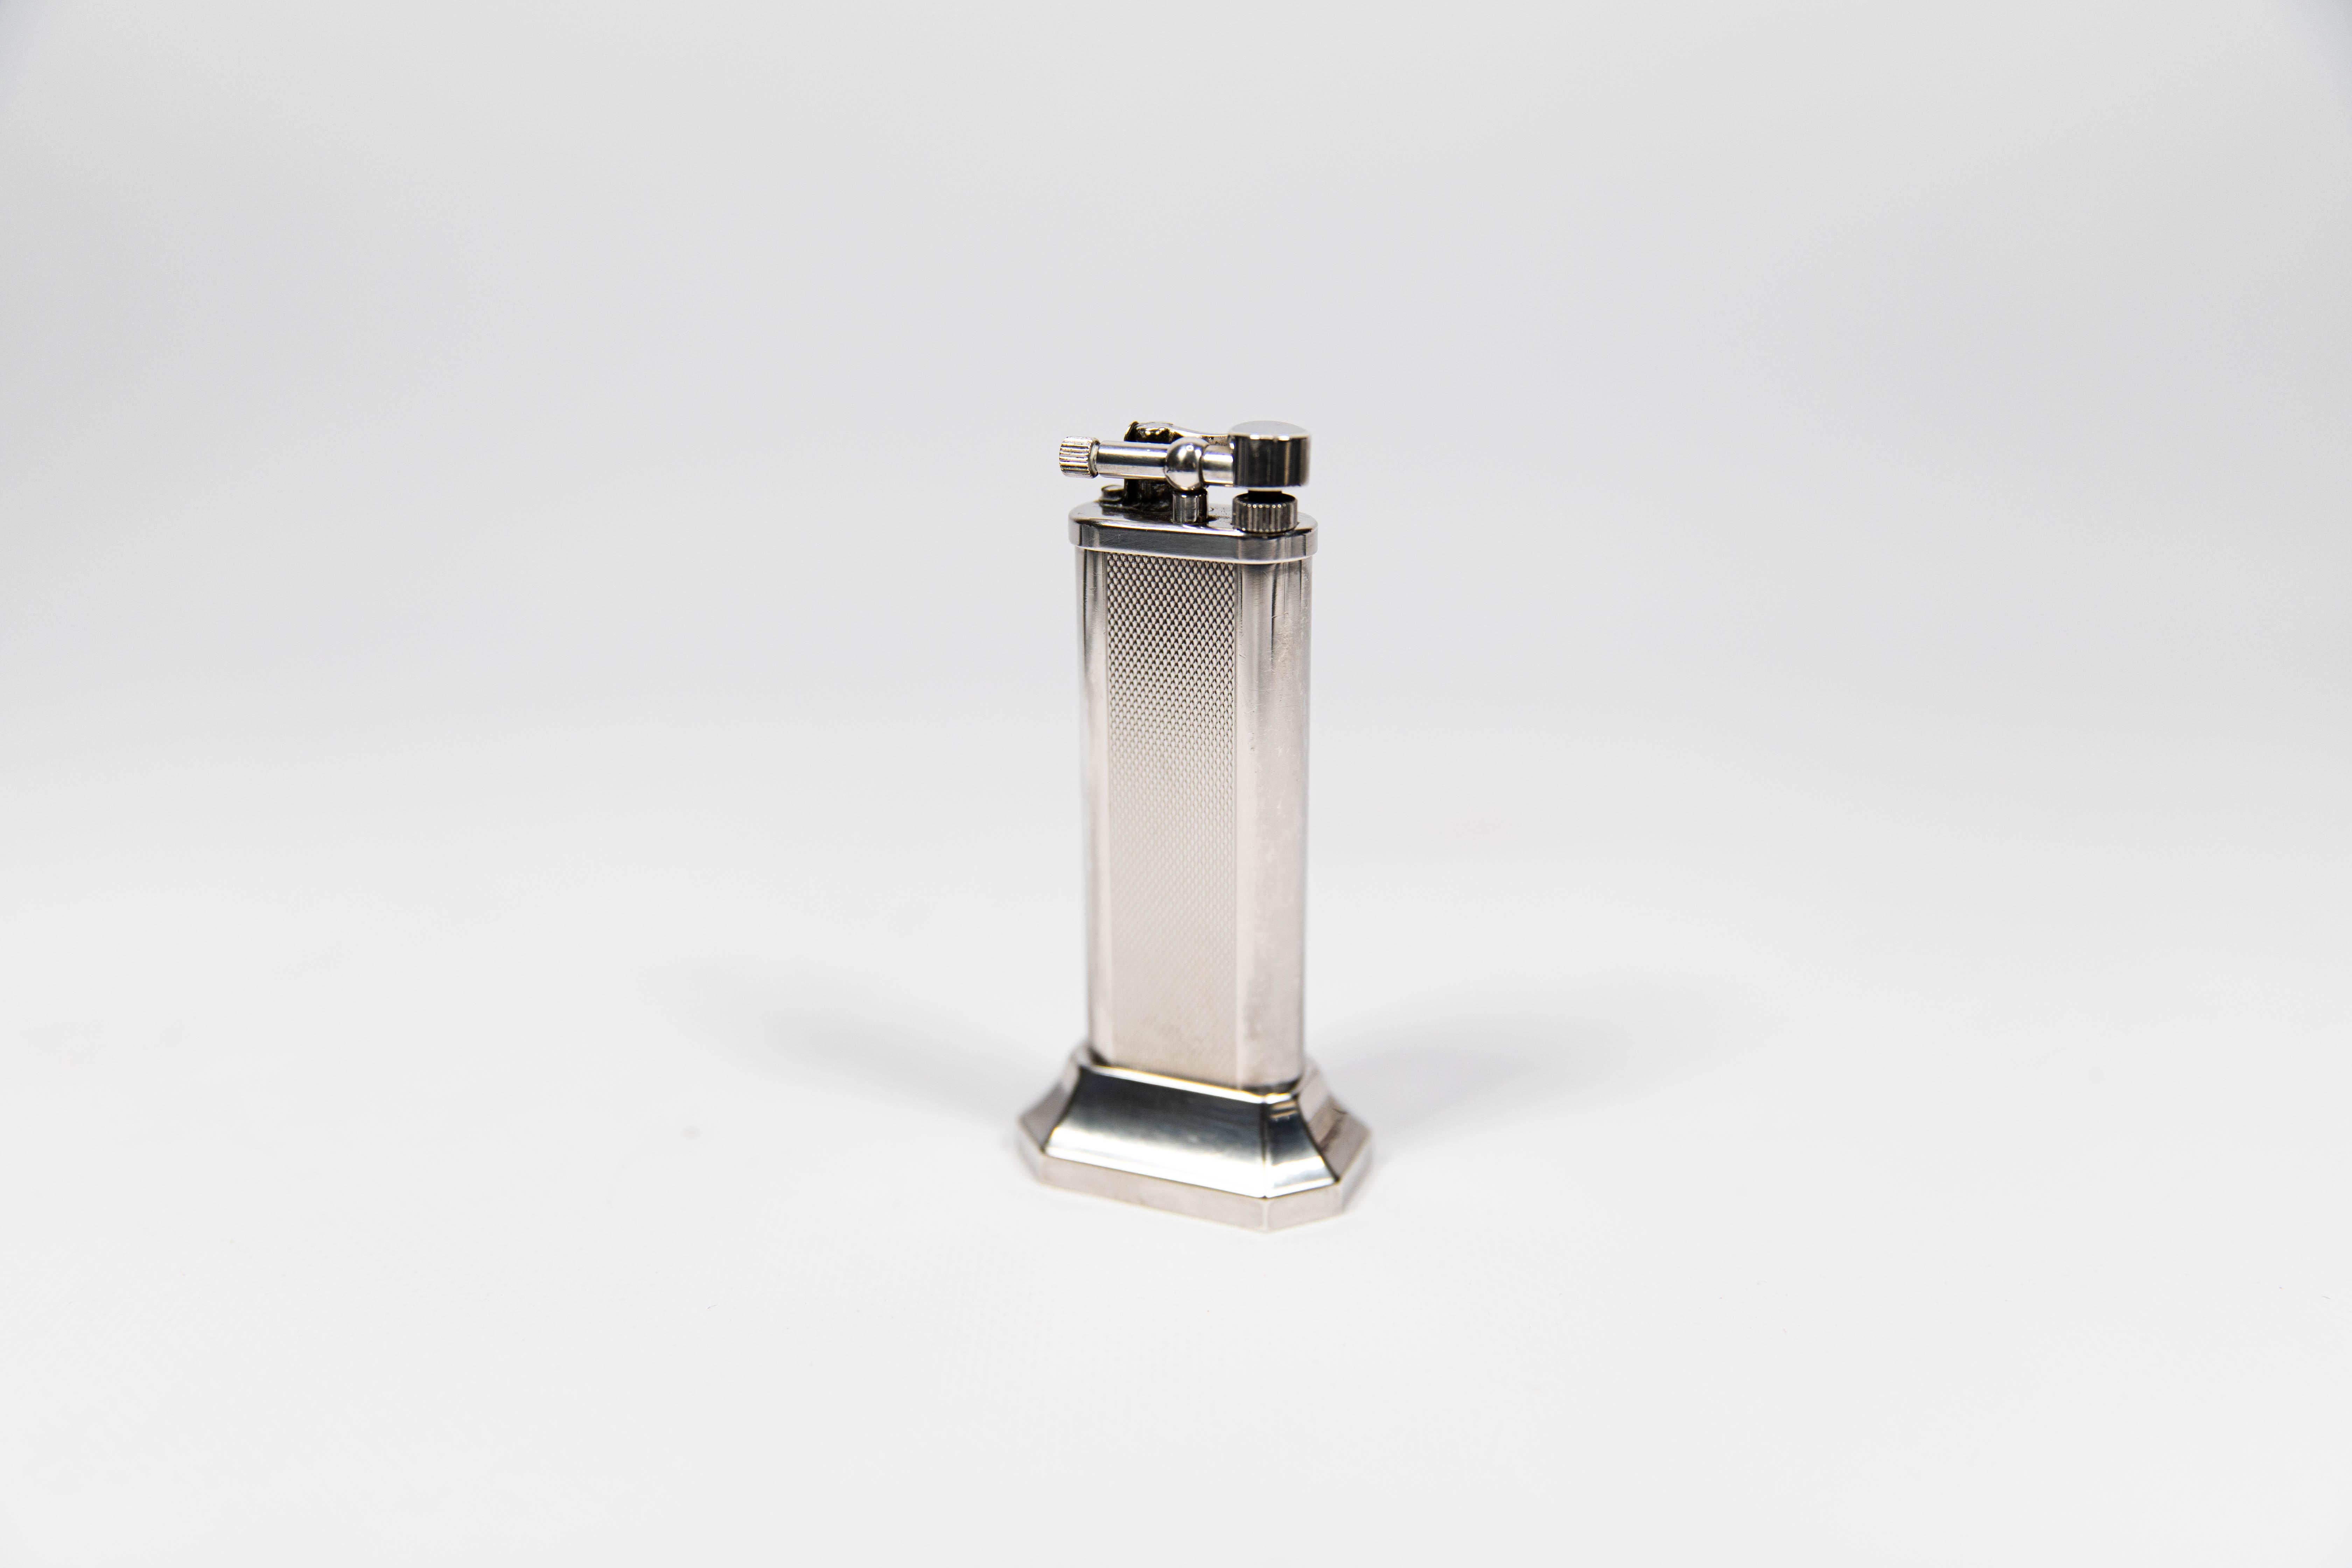 Vintage Dunhill Unique Table lighter Silver Plated 1970s

The iconic Dunhill name is known for quality, well-made cigarette lighters and other smoking implements. The company’s origin can be traced to Alfred Dunhill opening his first tobacco shop in